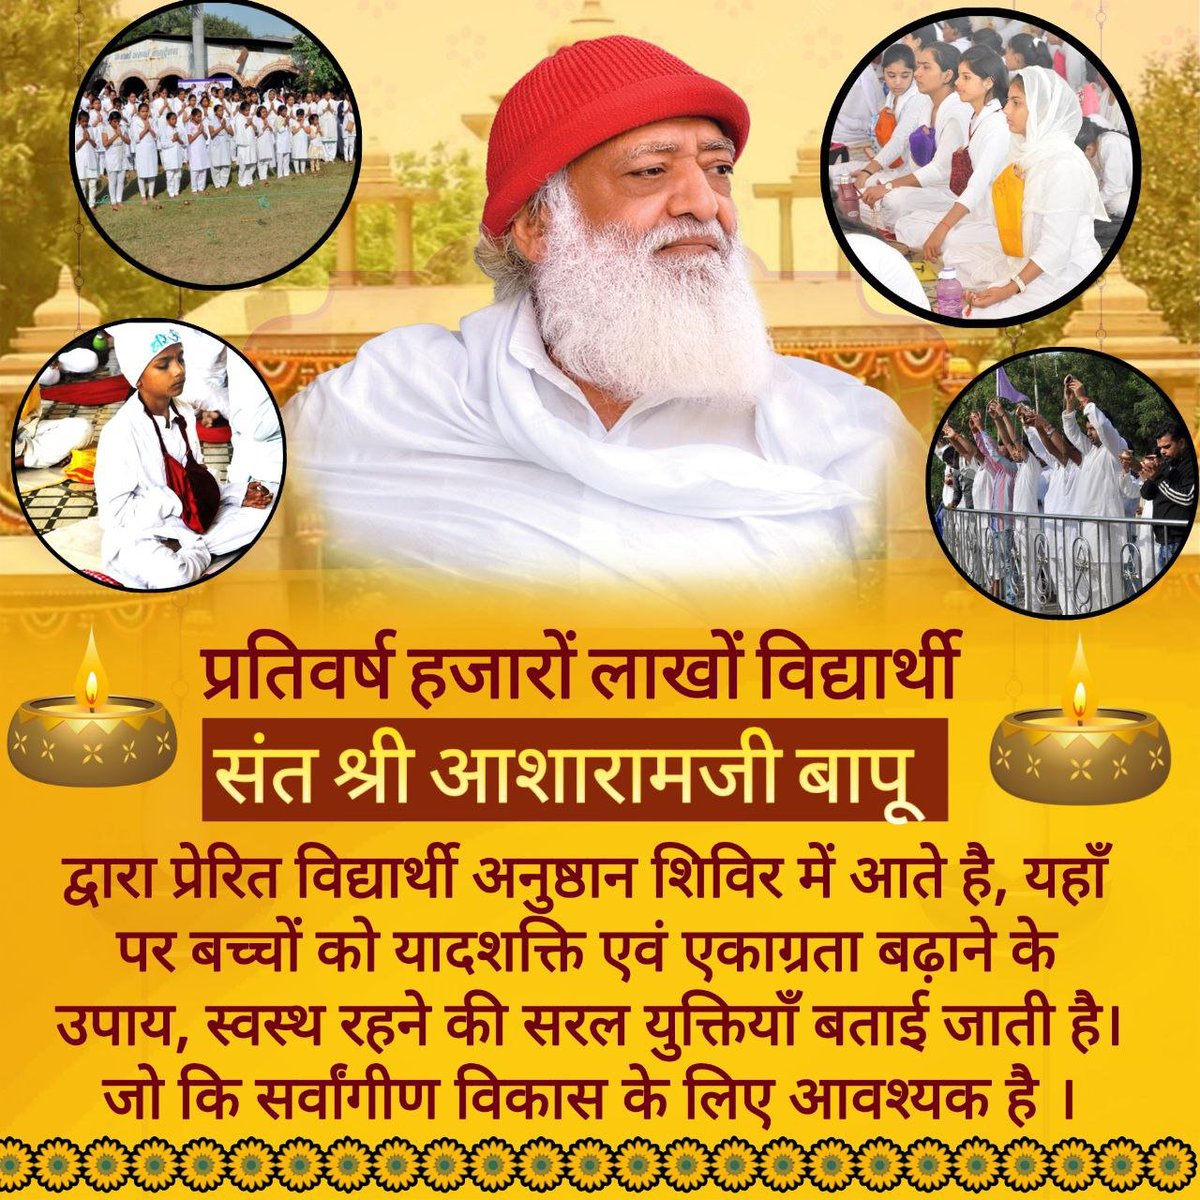 Sant Shri Asharamji Ashram is conducting the Vidhyarthi Anushthan Shivir from 8th to 14th May allowing students to utilize their Summer Vacation for enhancing their Spiritual and Mental Growth . Shivirs are very effective in #NurturingLittleMinds with spiritual & moral values.